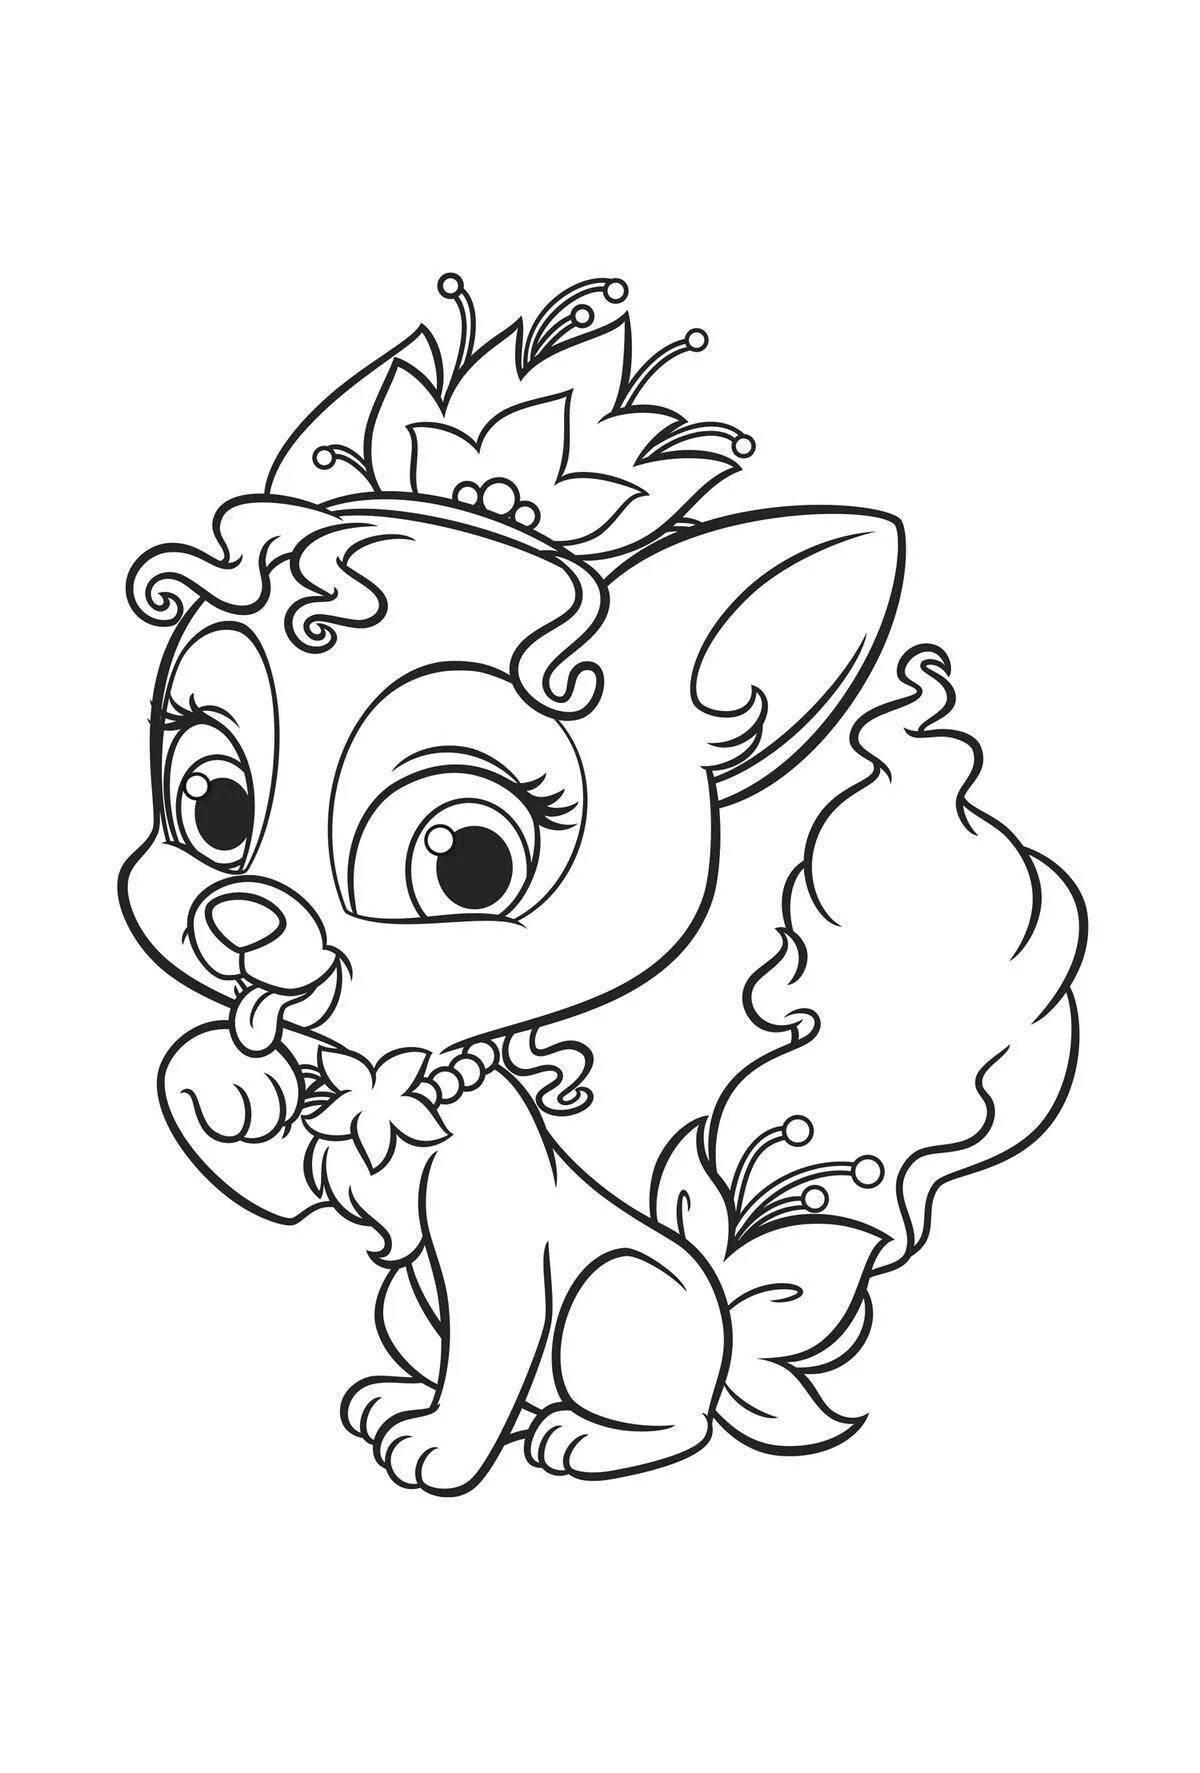 Fabulous animal coloring pages